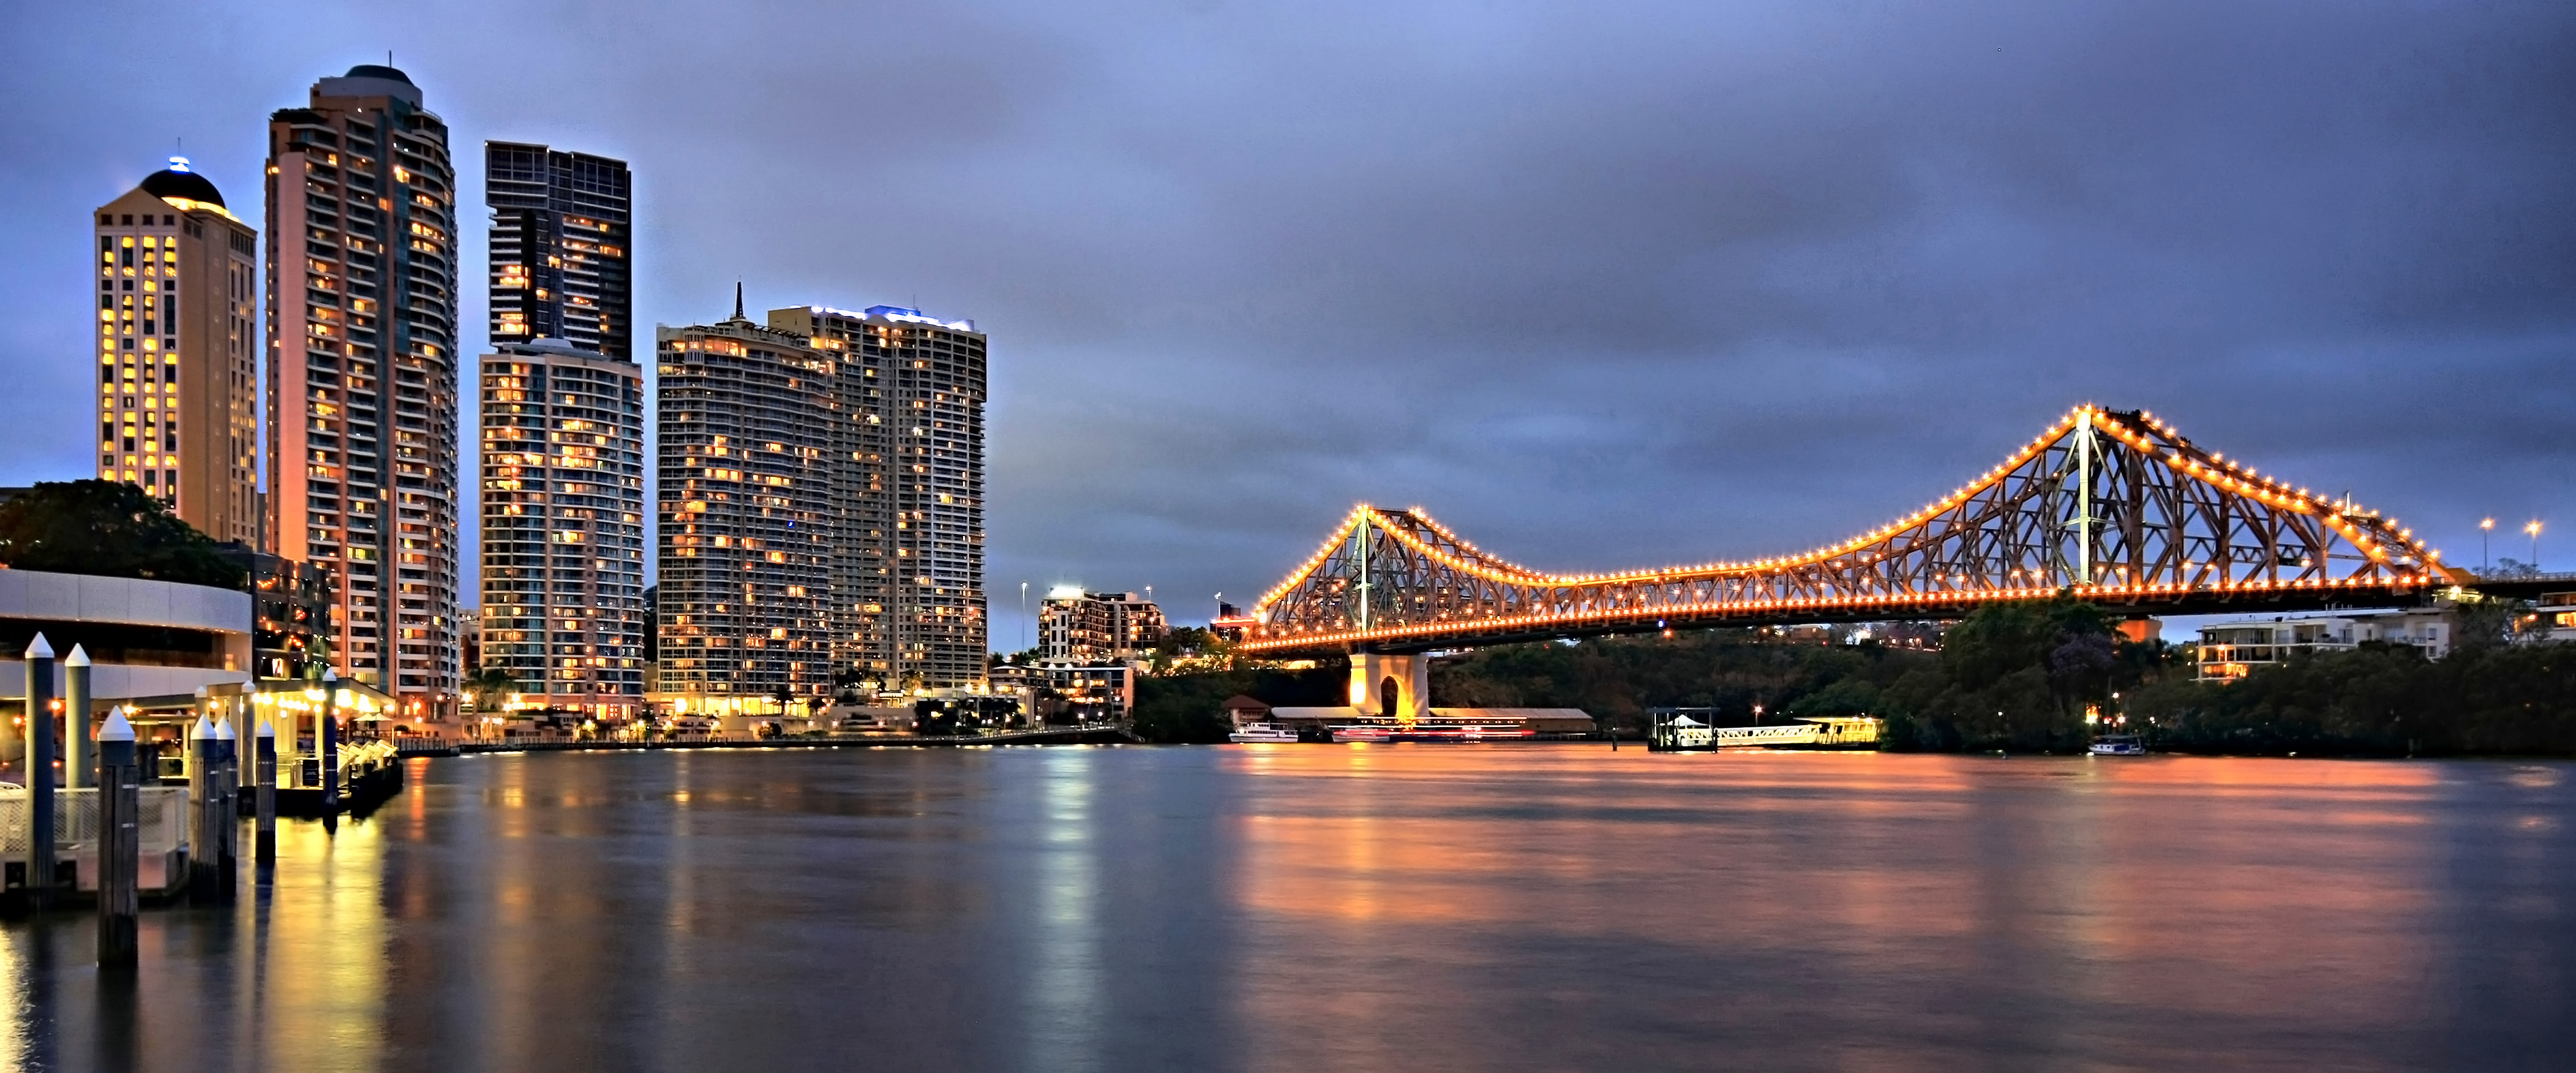 HD Quality Wallpaper | Collection: Man Made, 3777x1573 Story Bridge